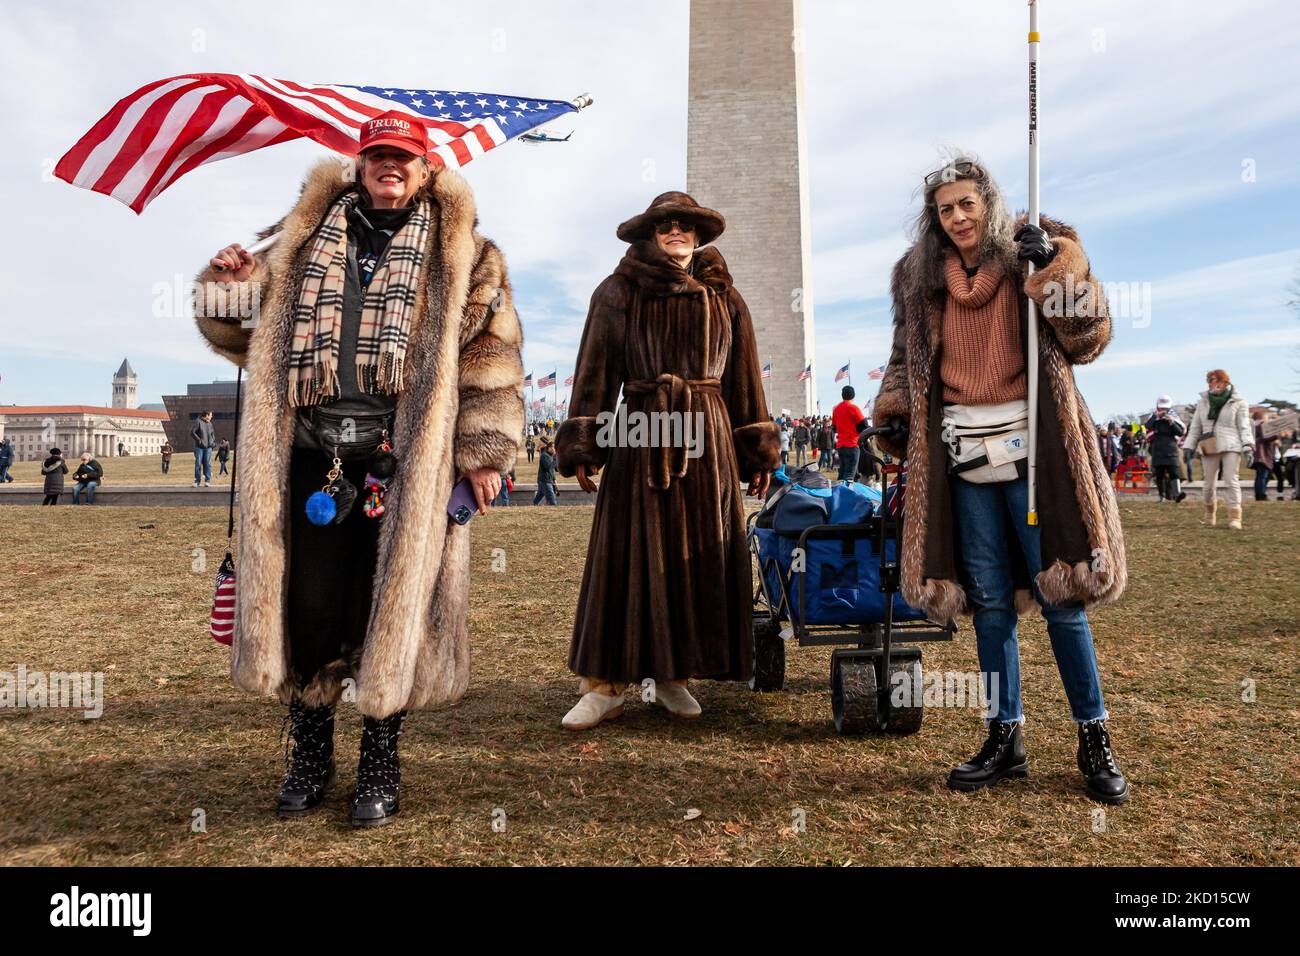 Trump supporters in full length fur coats attend the Defeat the Mandates rally and march in Washington, DC. Organizers and attendees claim that vaccines and mask-wearing should be a personal choice, without regard to public health. The event was billed as a protest against vaccine and mask mandates used to stop the spread of the coronavirus by all Americans, but the crowd overwhelmingly leans right. 20,000 people are expected for the event. (Photo by Allison Bailey/NurPhoto) Stock Photo